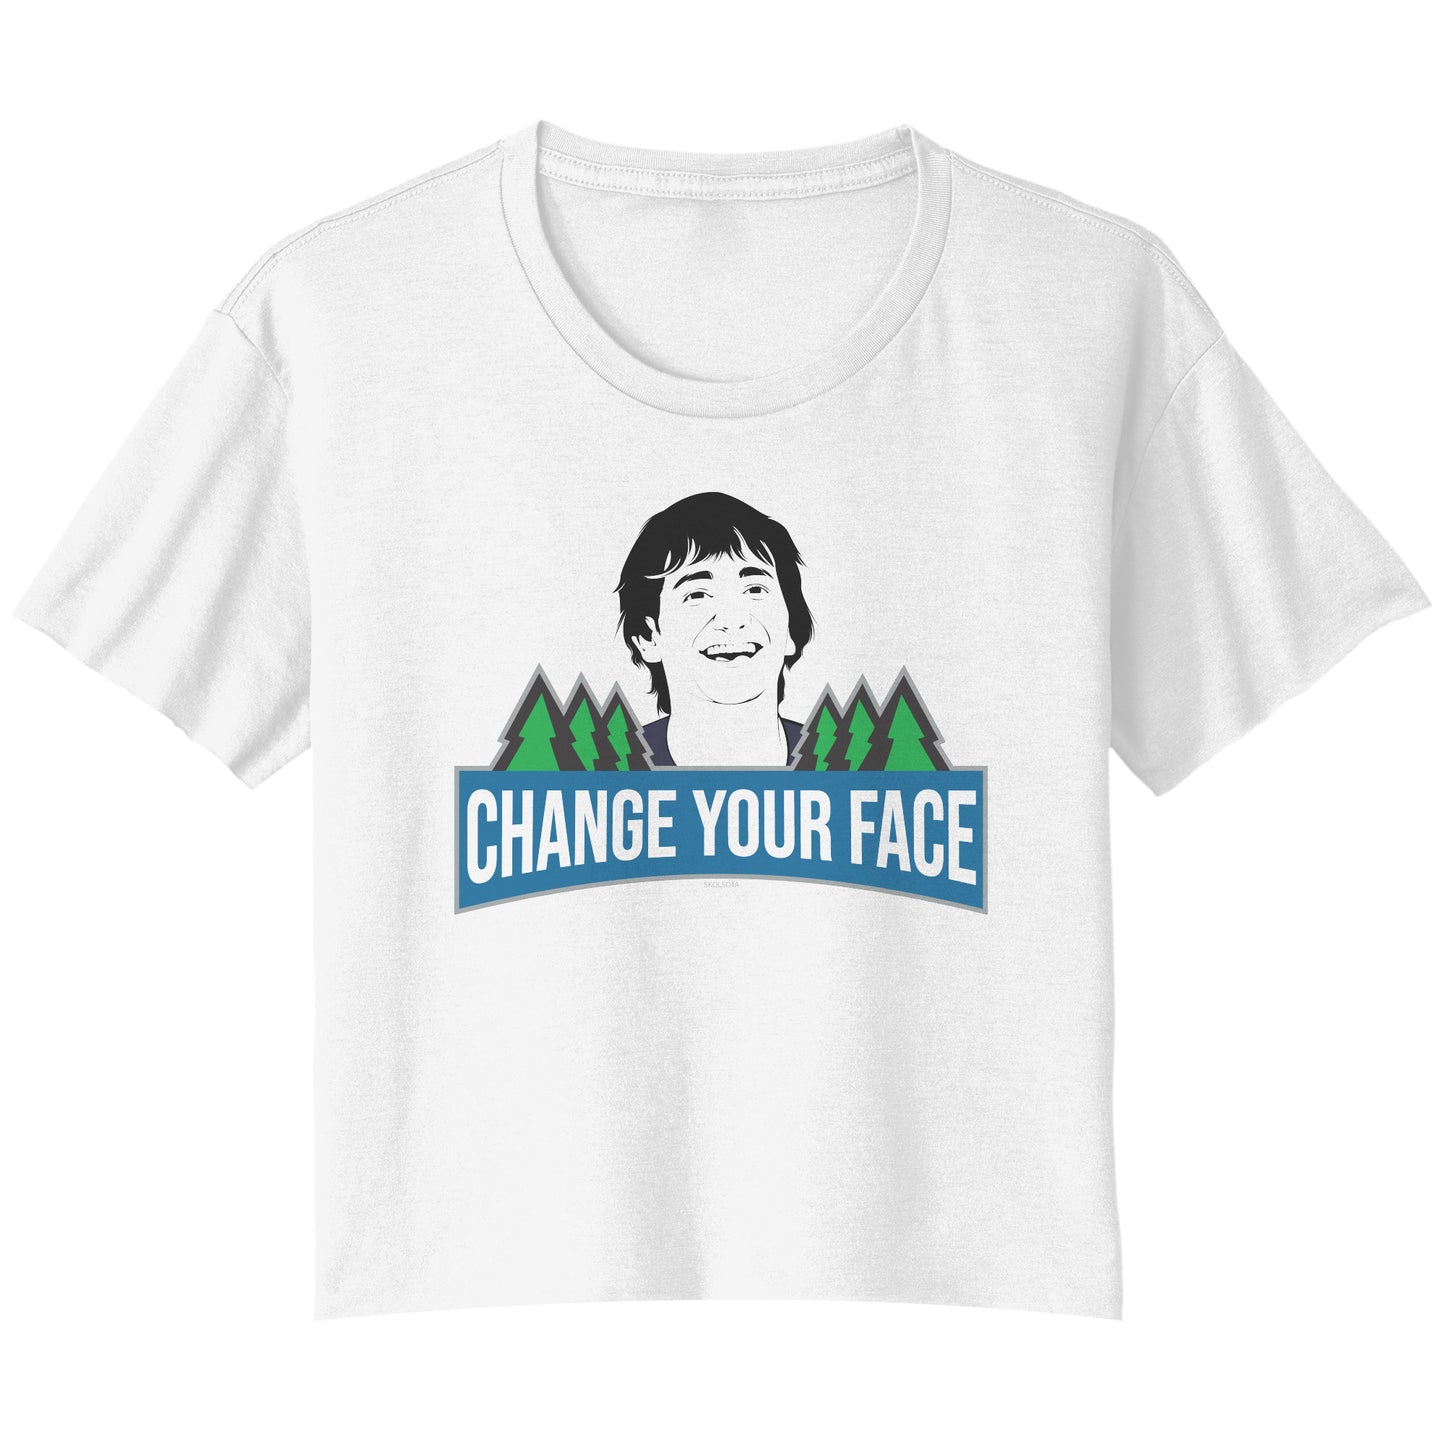 Ricky Rubio Change Your Face - Ladies Flowy Crop T-Shirt